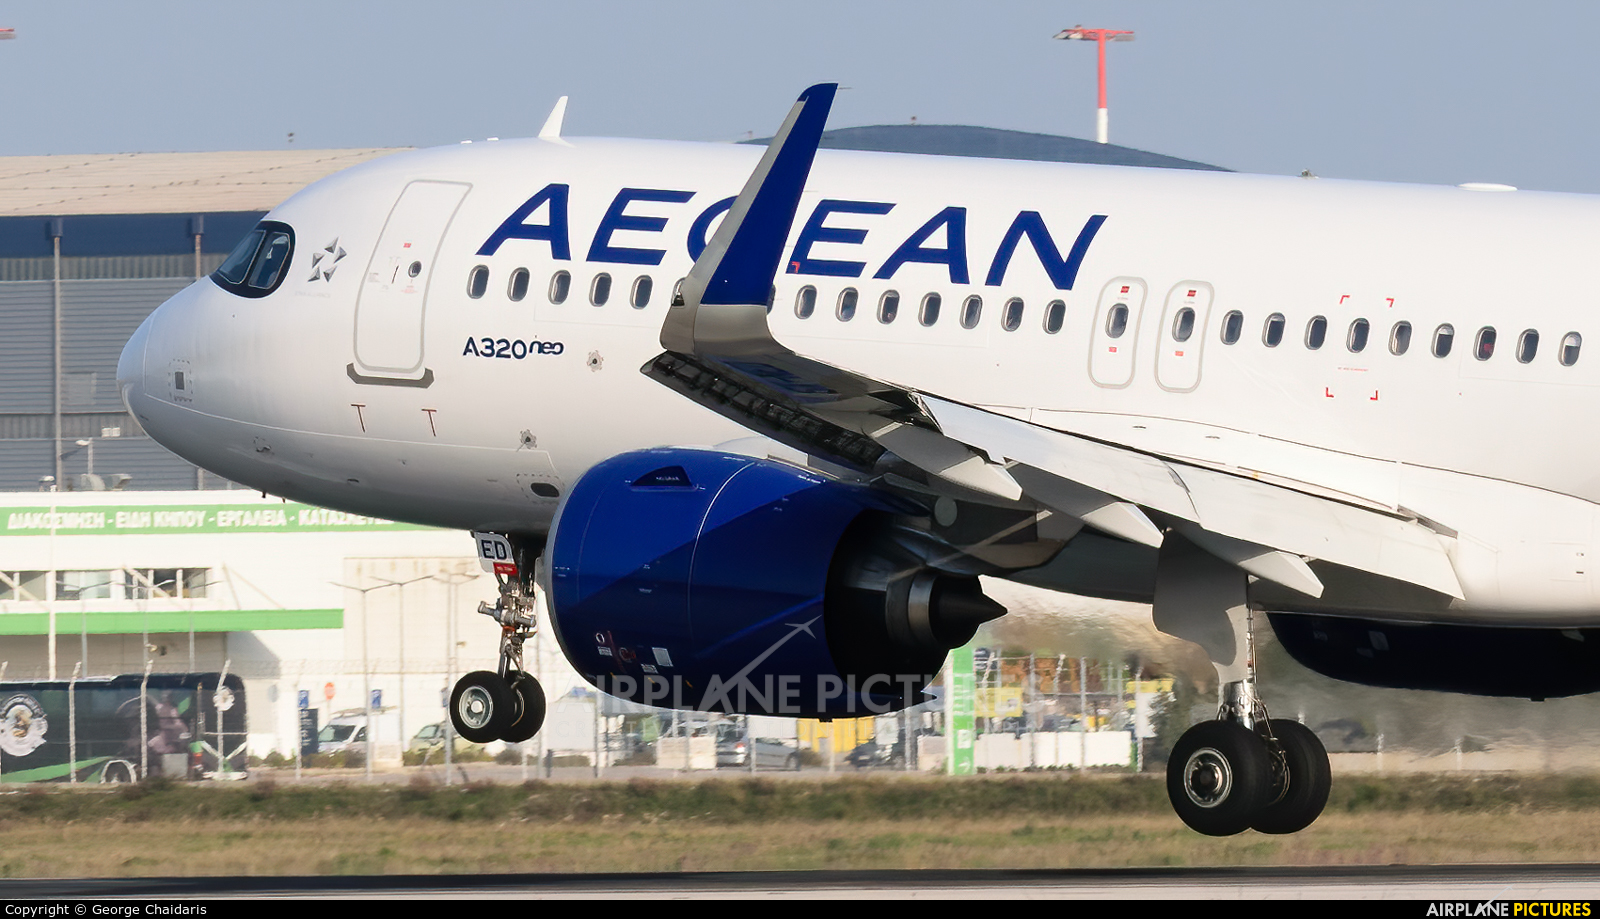 Aegean Airlines SX-NED aircraft at Athens - Eleftherios Venizelos